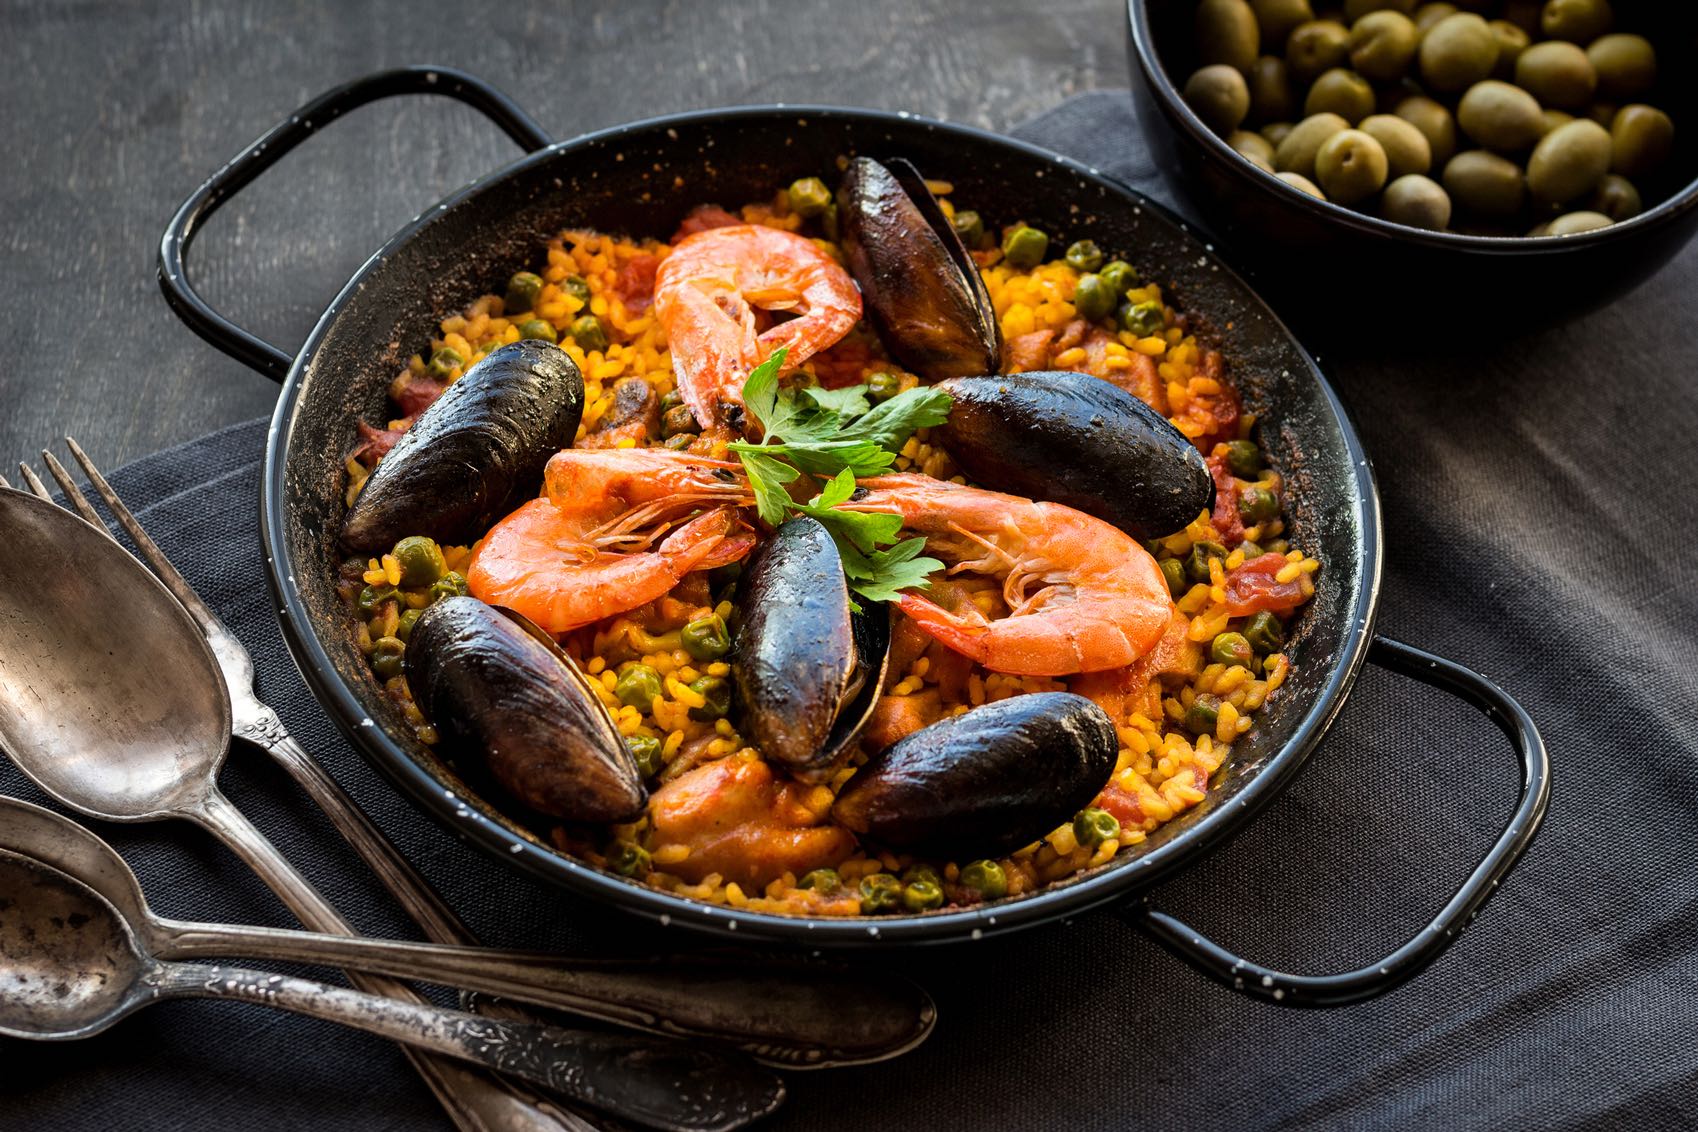 3. Mouth-watering paella